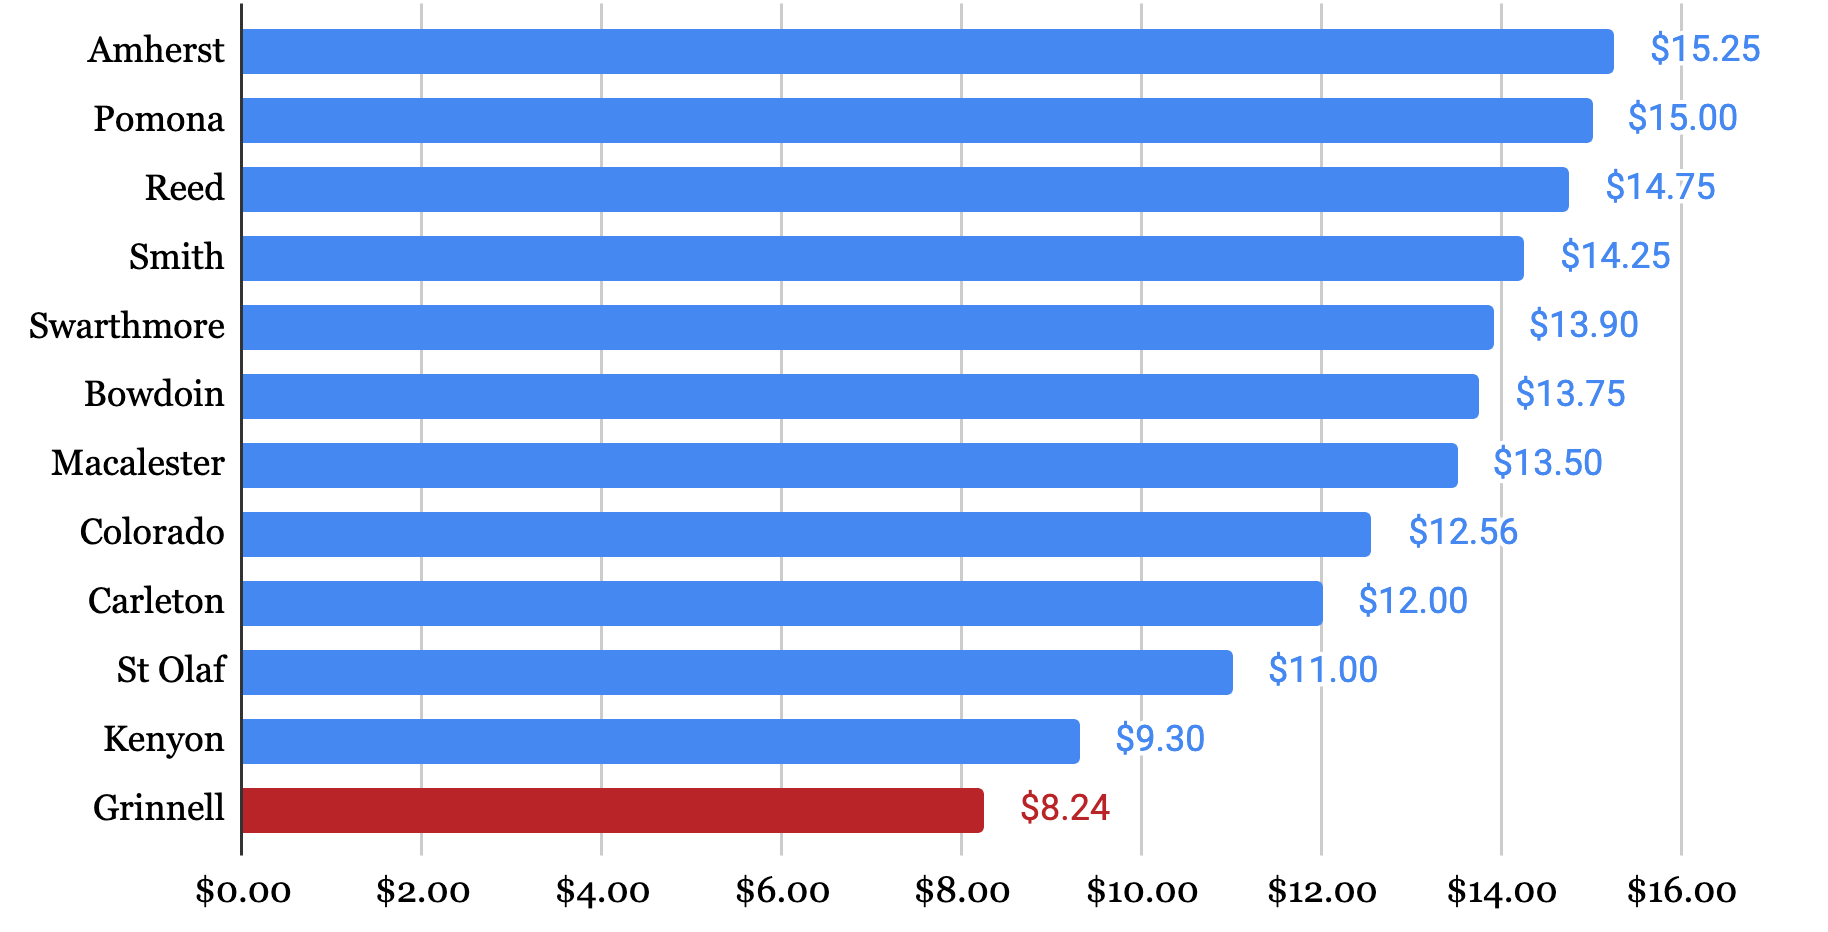 A graph comparing wages at institutions comperable to Grinnell College. Amherst: $15.25, Pomona: $15, Reed: $14.75, Smith: $14.25, Swarthmore: $13.90, Bowdoin: $13.75, Macalaster: $13.50, Colorado: $12.56, Carleton: $12, St. Olaf: $11, Kenyon: $9.30, and Grinnell: $8.24.